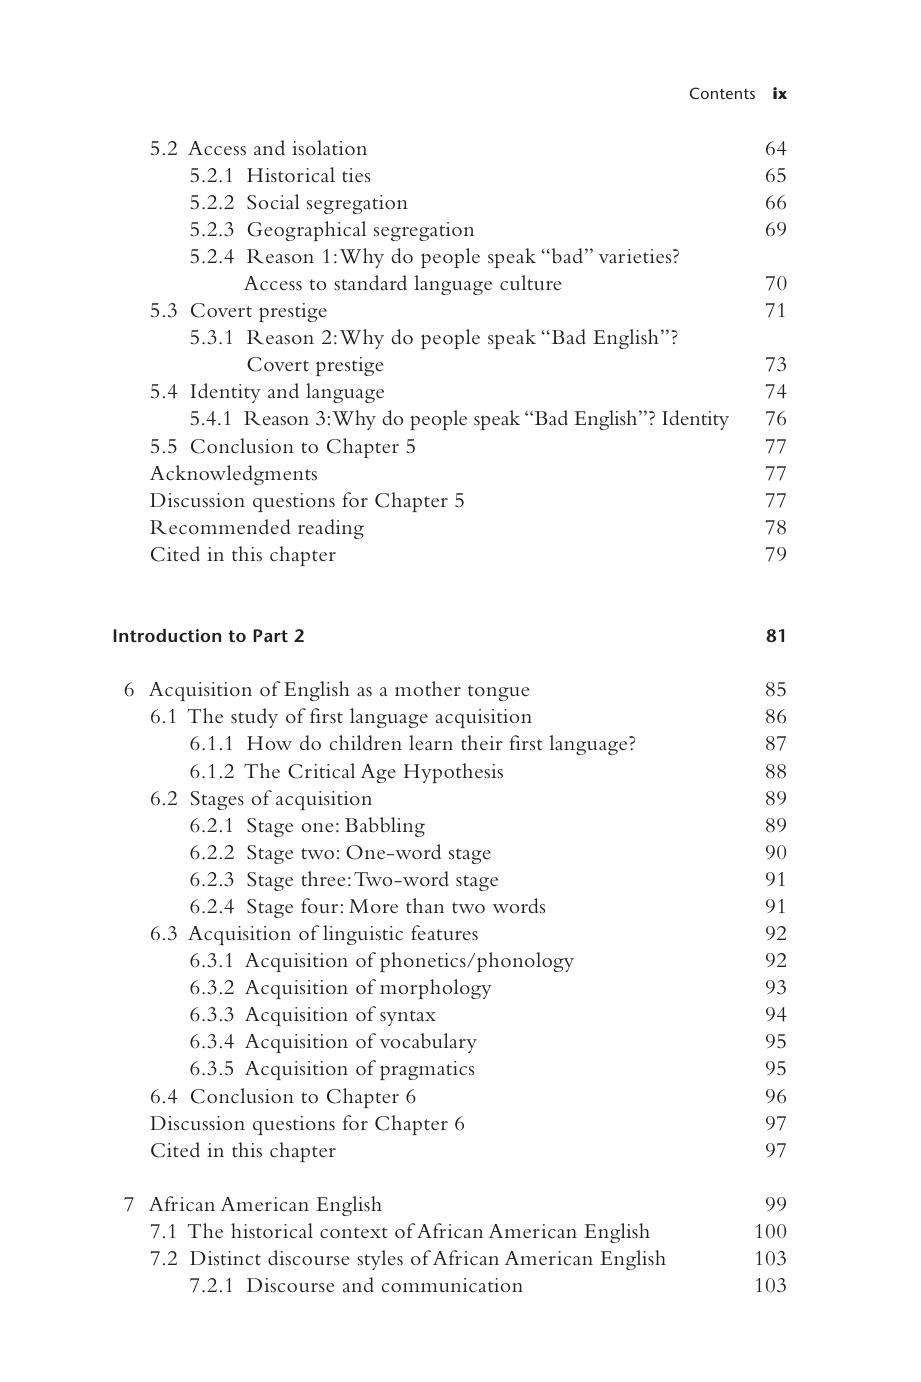 Peterson E. - Making Sense of «Bad English». An Introduction to Language Attitudes and Ideologies - 2019 10